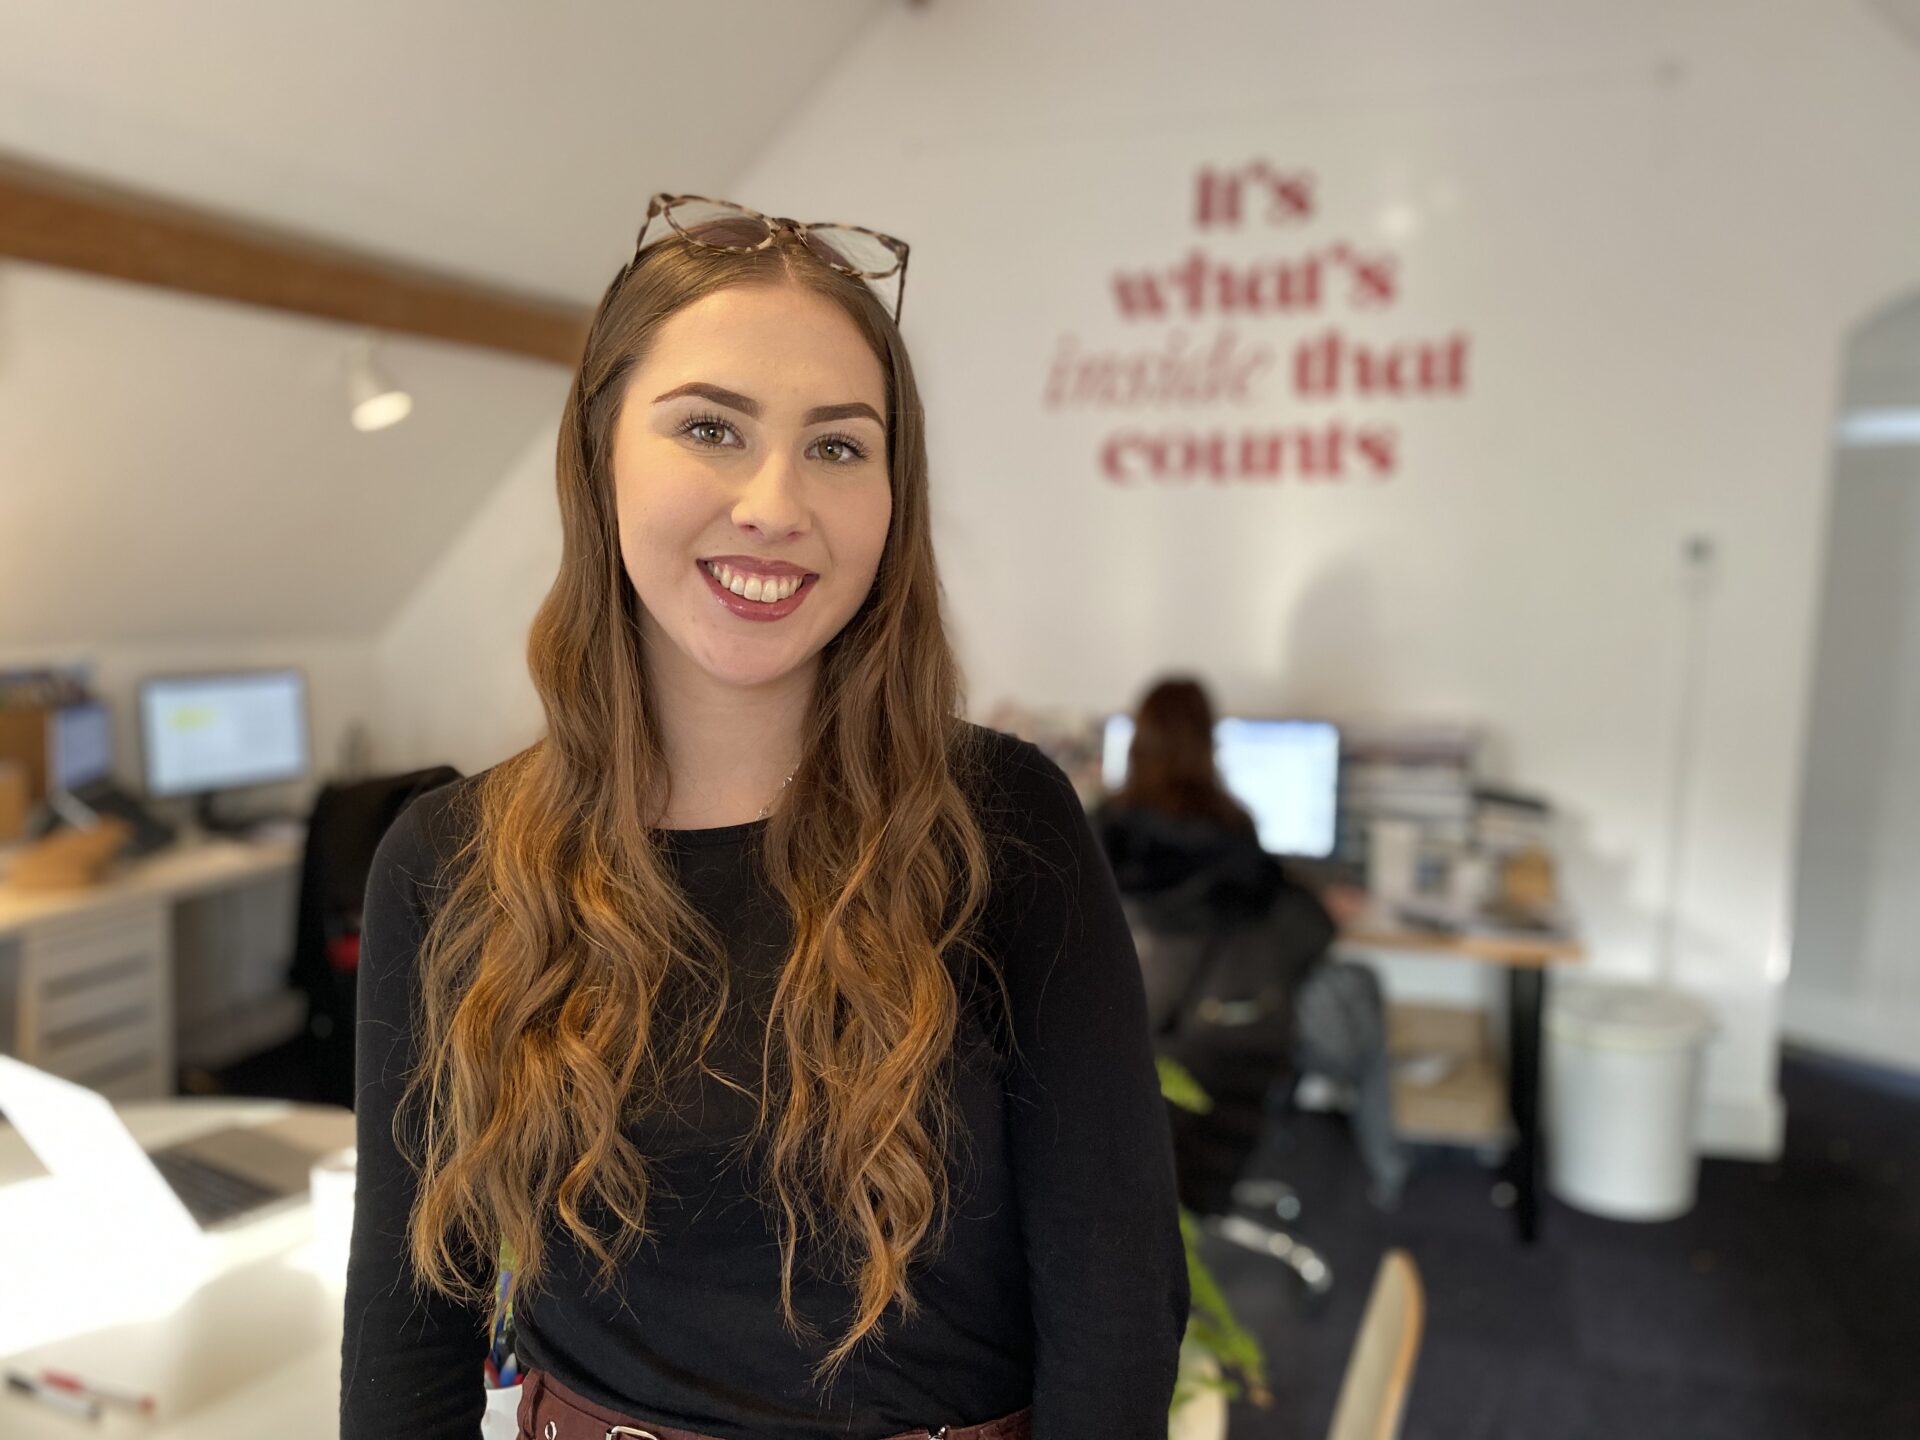 Swansea Uni Student Work Experience At Communications Agency